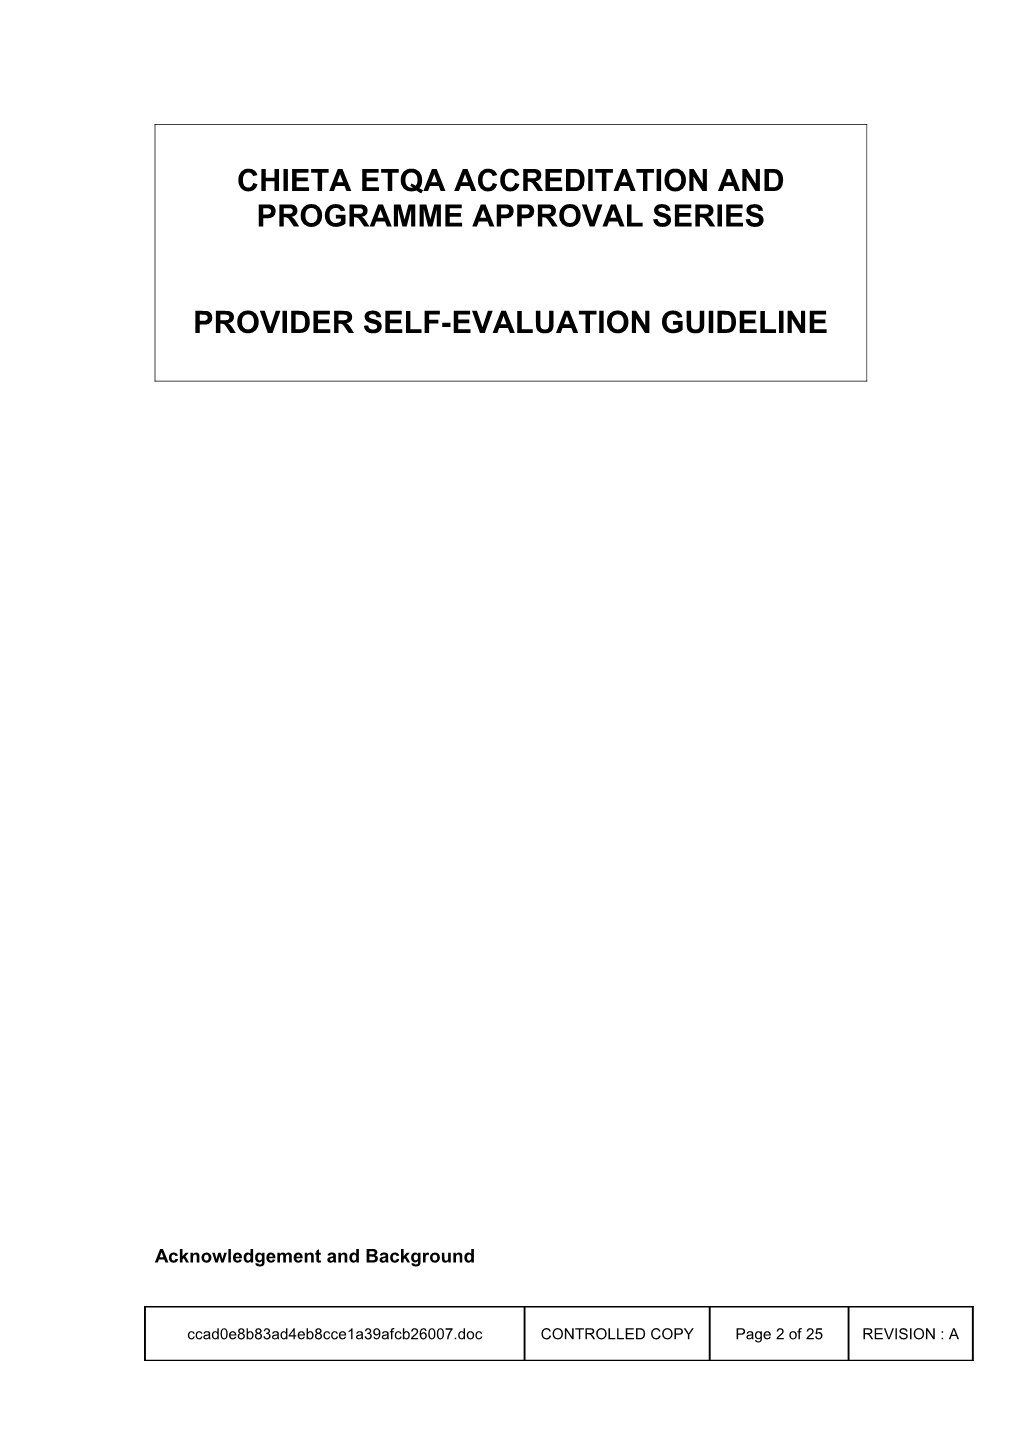 Proc 015 Provider Self Evaluation Guidelines for Accreditation